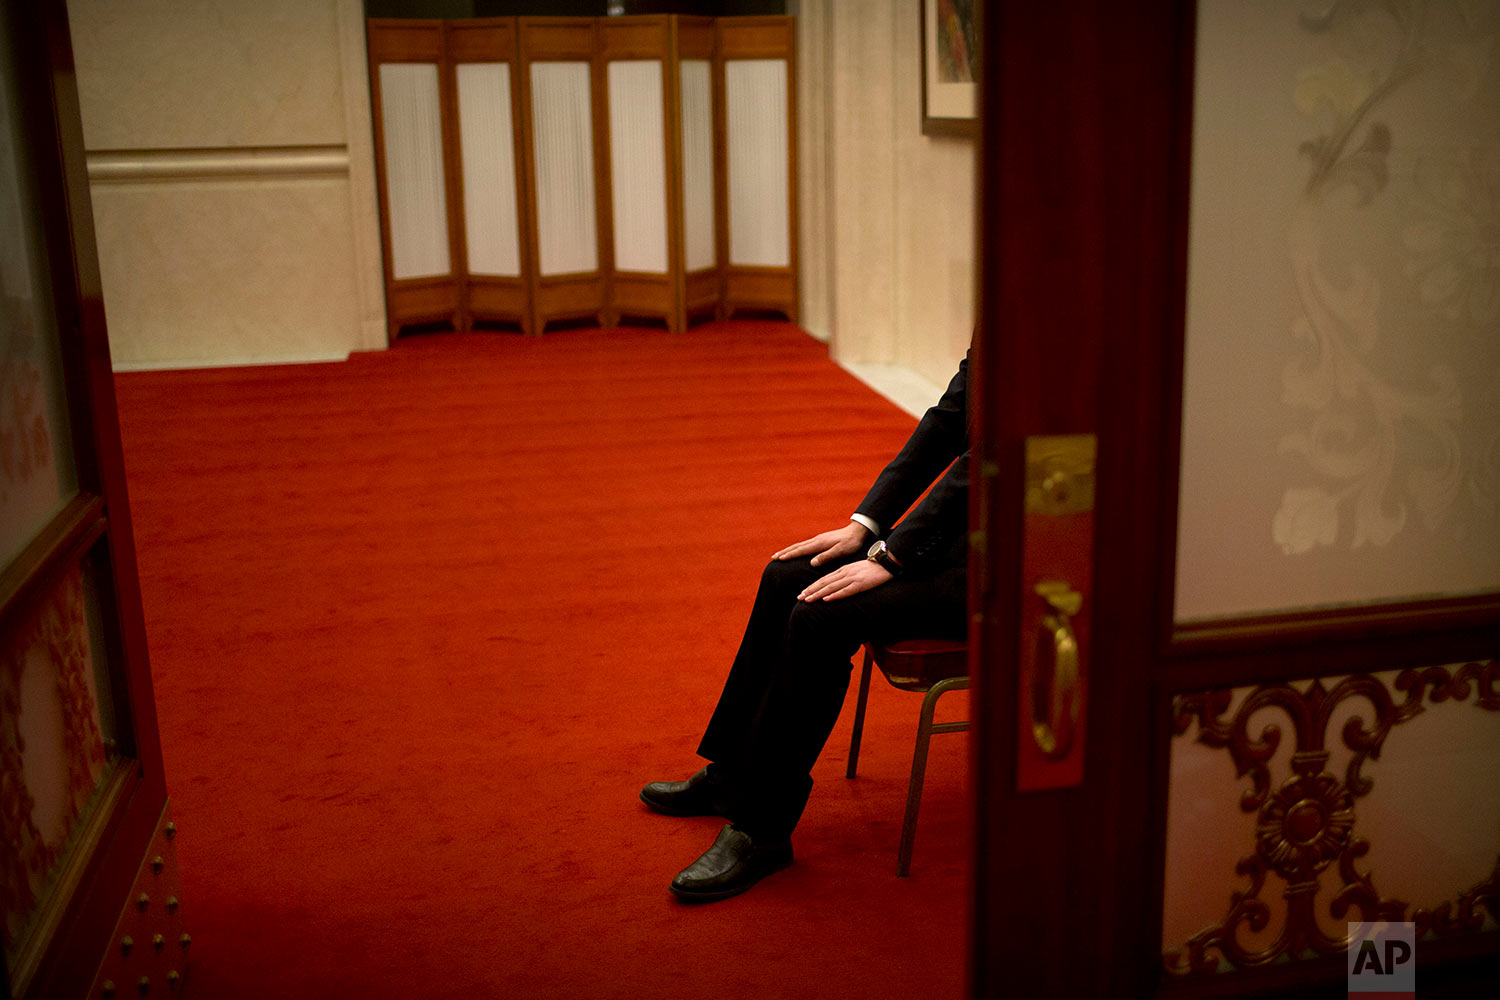  In this Tuesday, March 6, 2018 photo, a security official sits in a chair at a doorway at the Great Hall of the People in Beijing. (AP Photo/Mark Schiefelbein) 